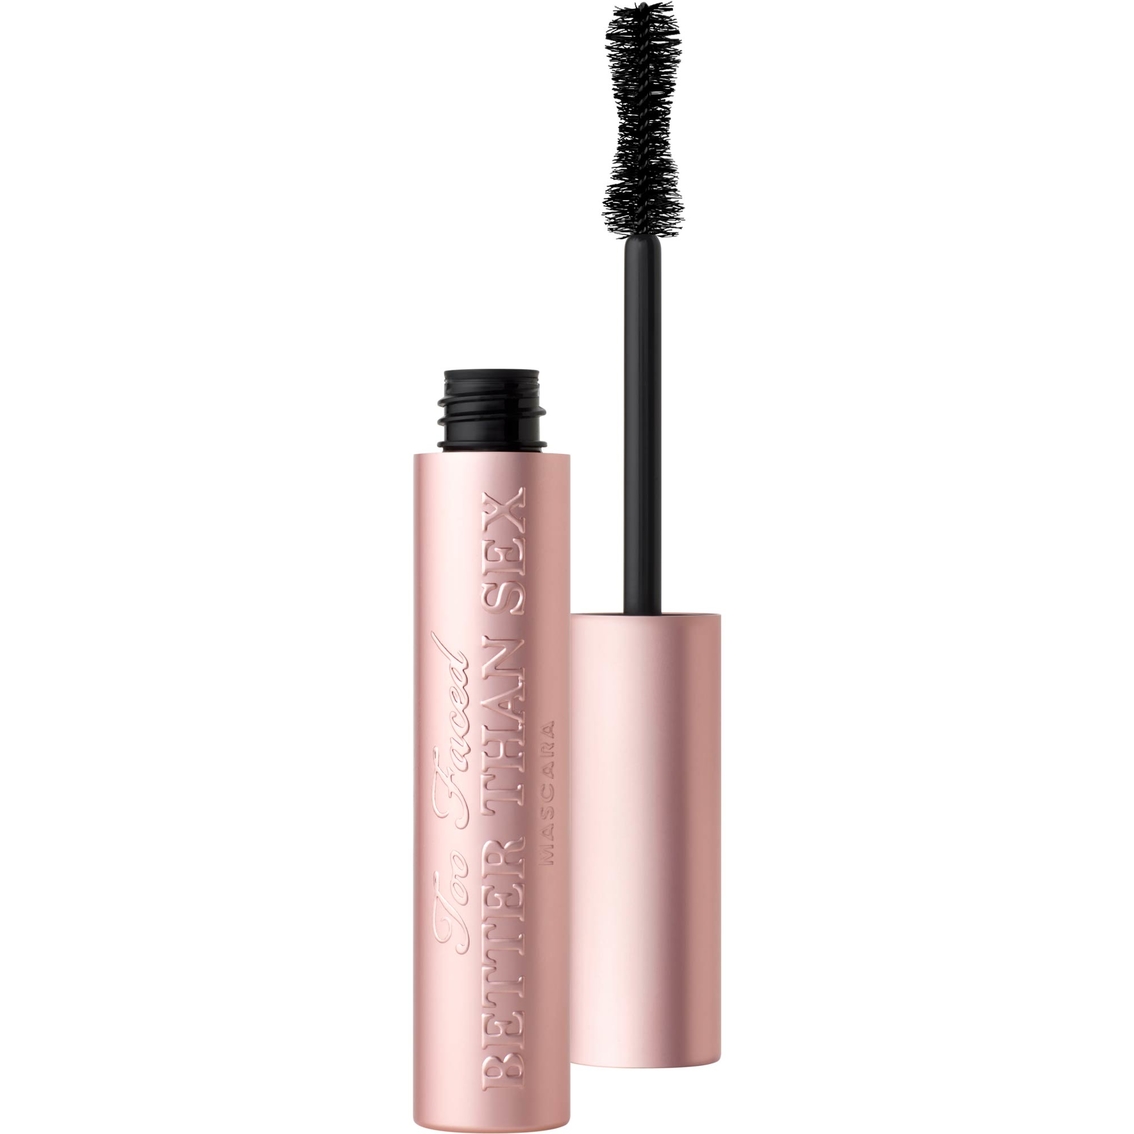 Too Faced Better Than Sex Mascara - Image 2 of 6